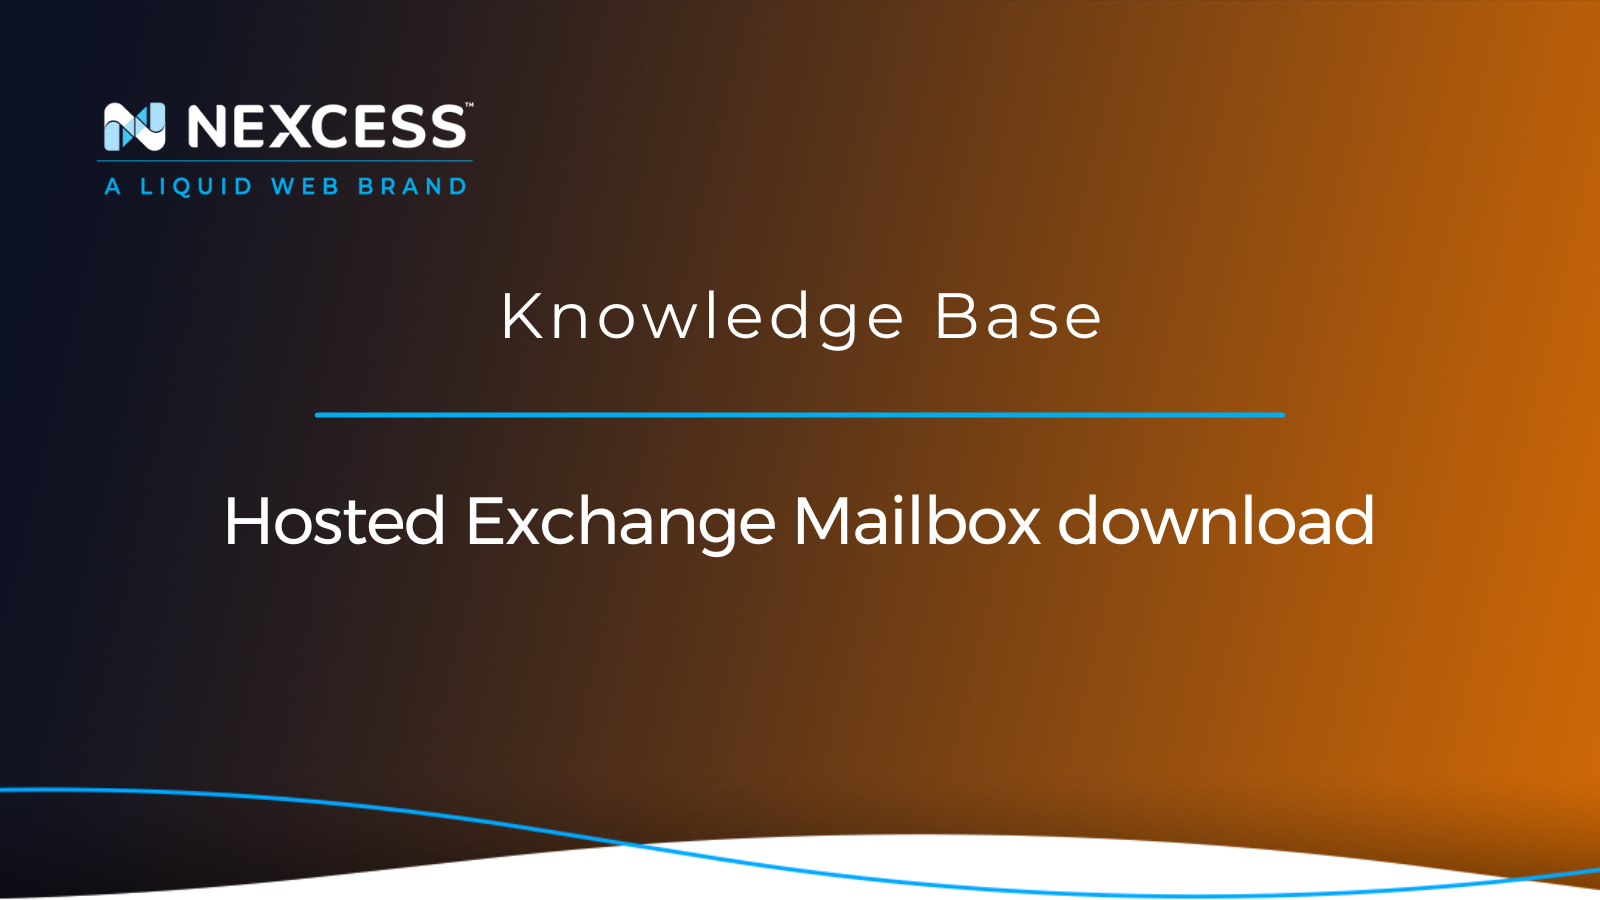 Hosted Exchange Mailbox download